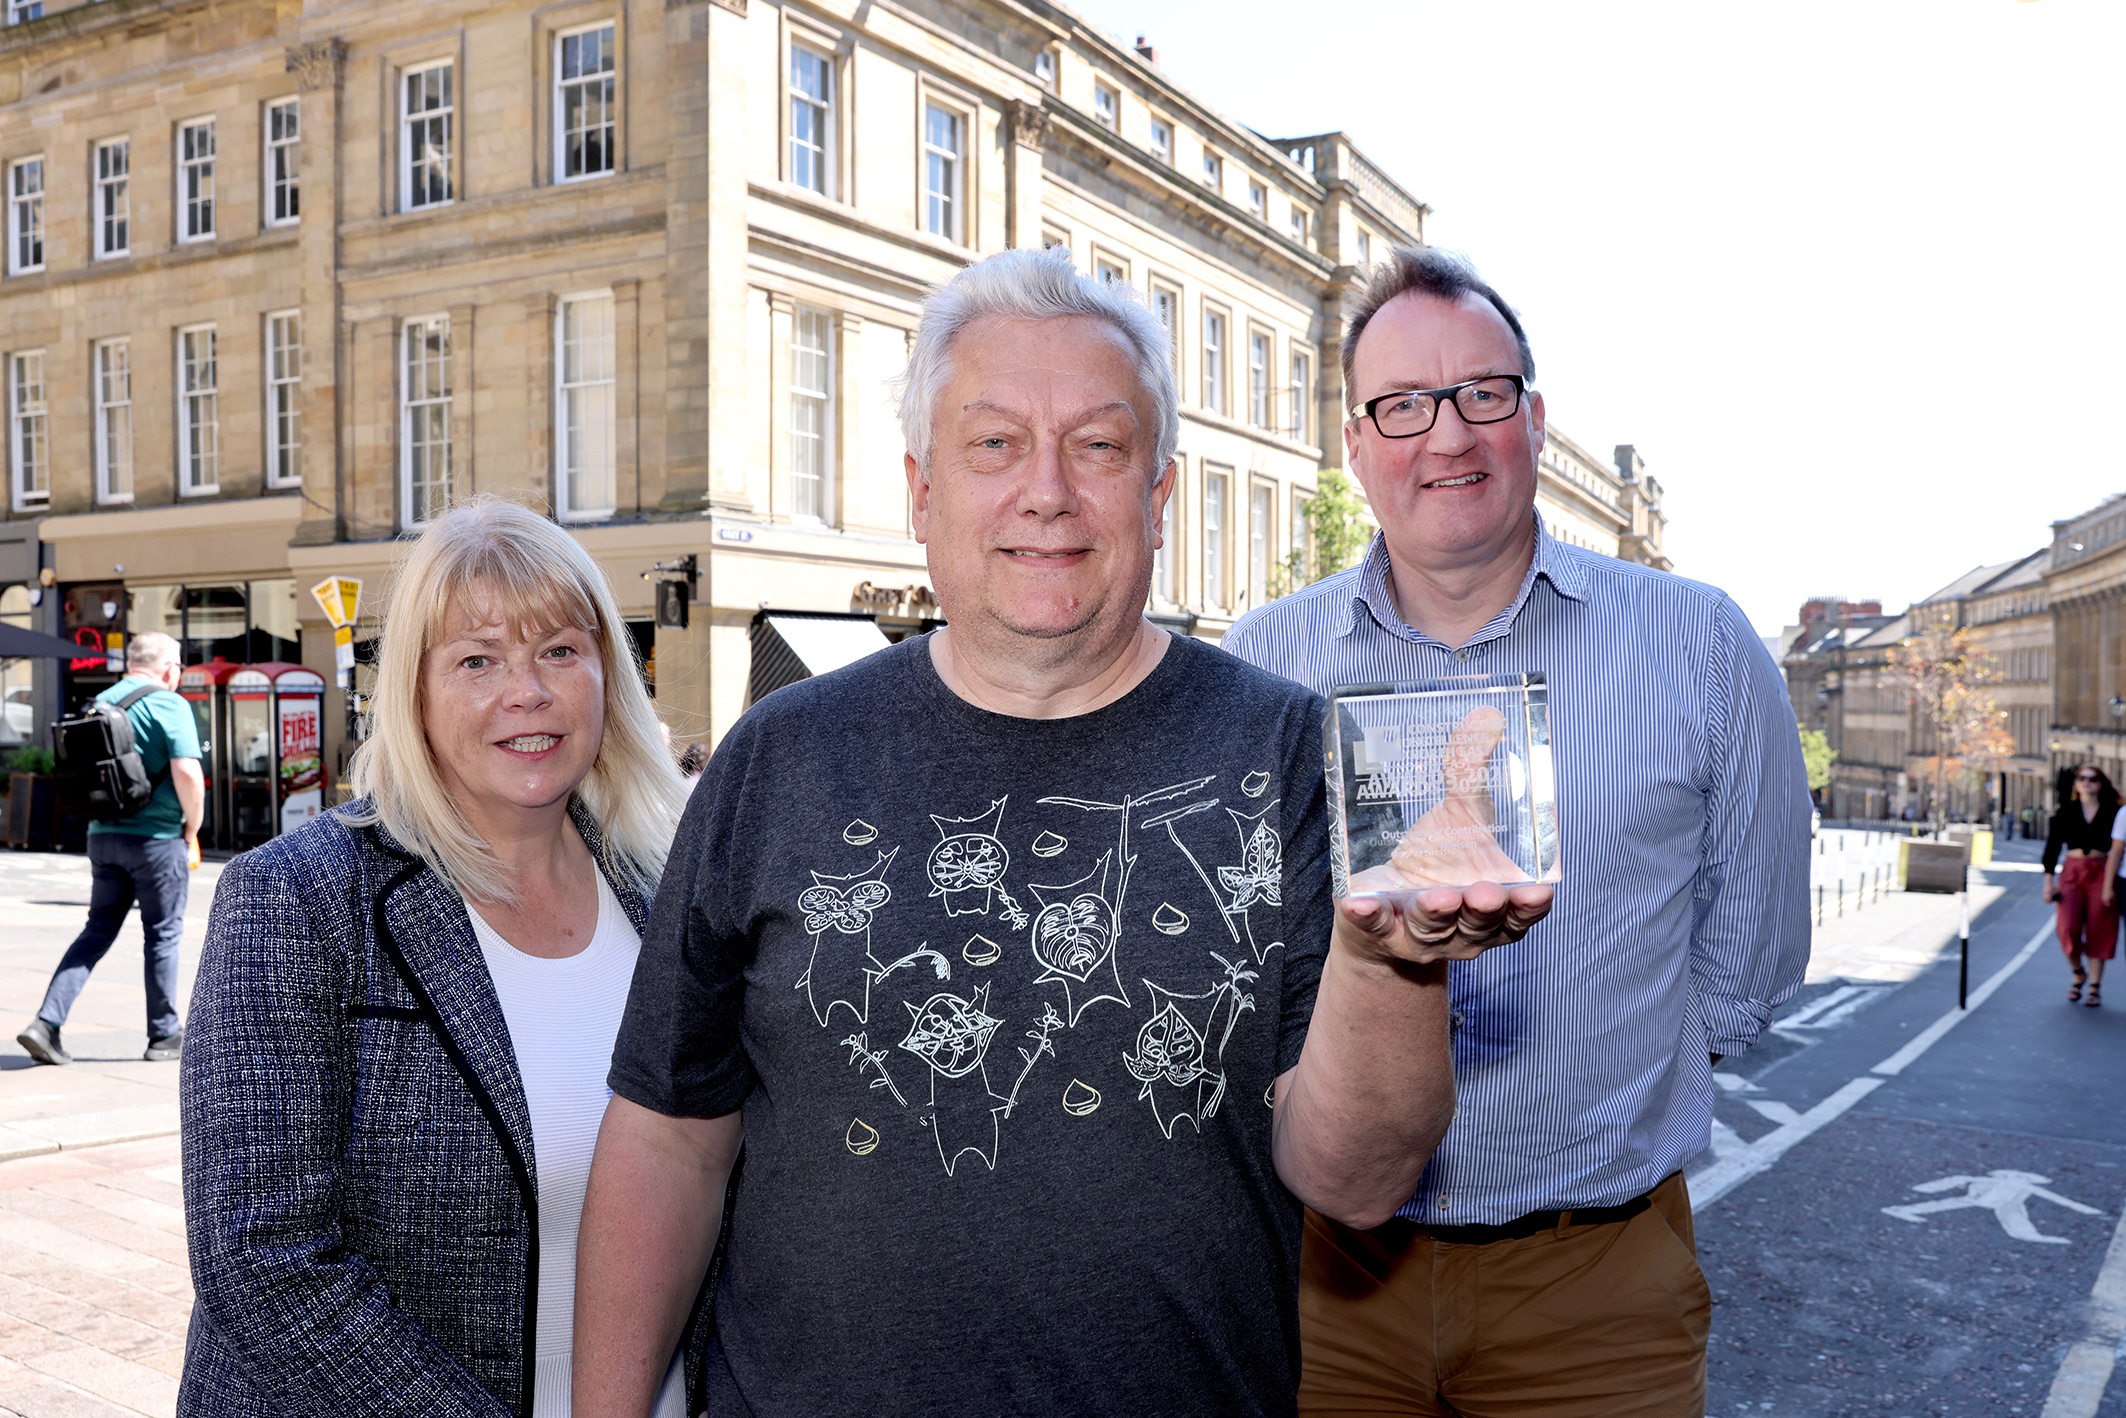 John receiving his award from Tim Bailey and Catriona Lingwood on a sunny Grey Street in Newcastle.